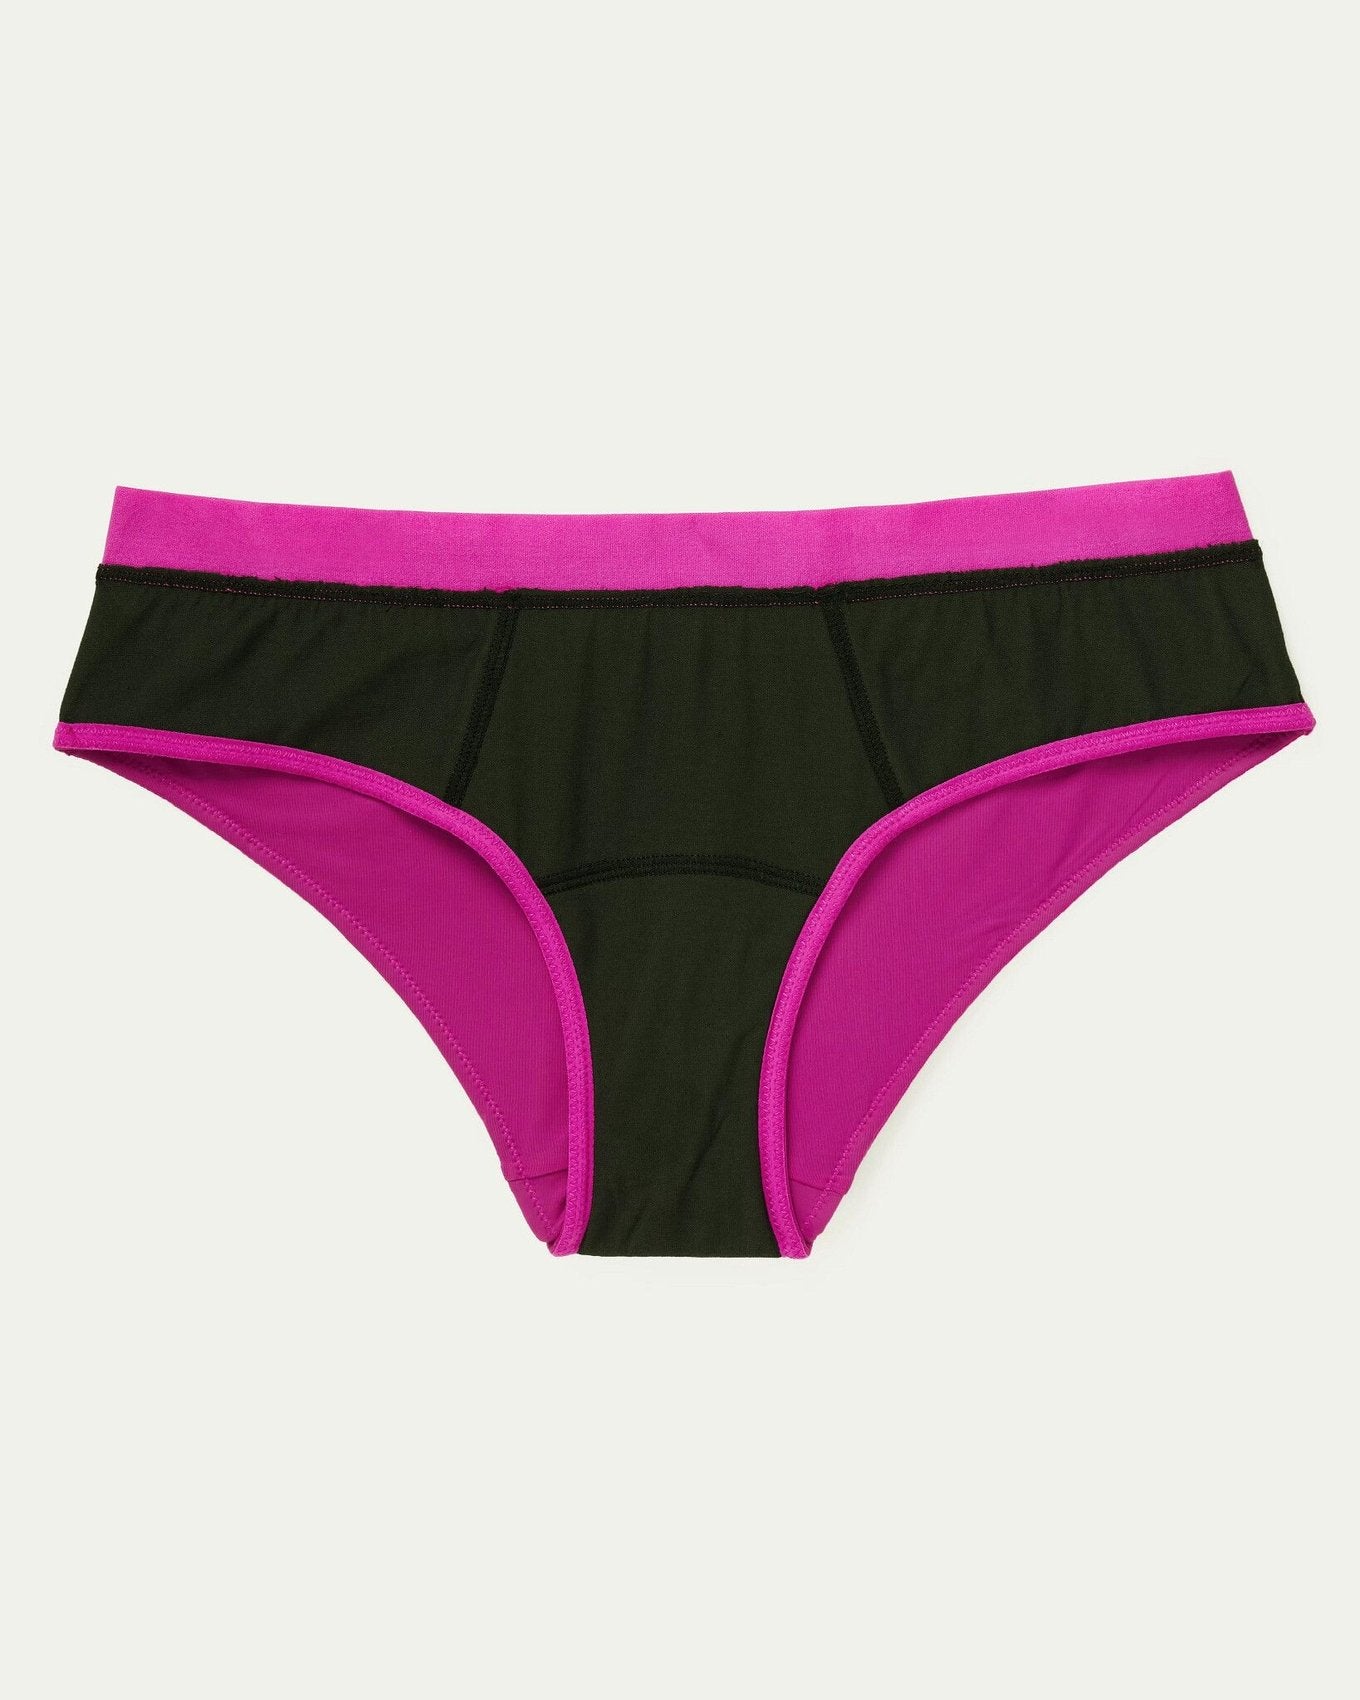 Joyja Cindy period-proof panty in color Festival Fuchsia and shape cheeky